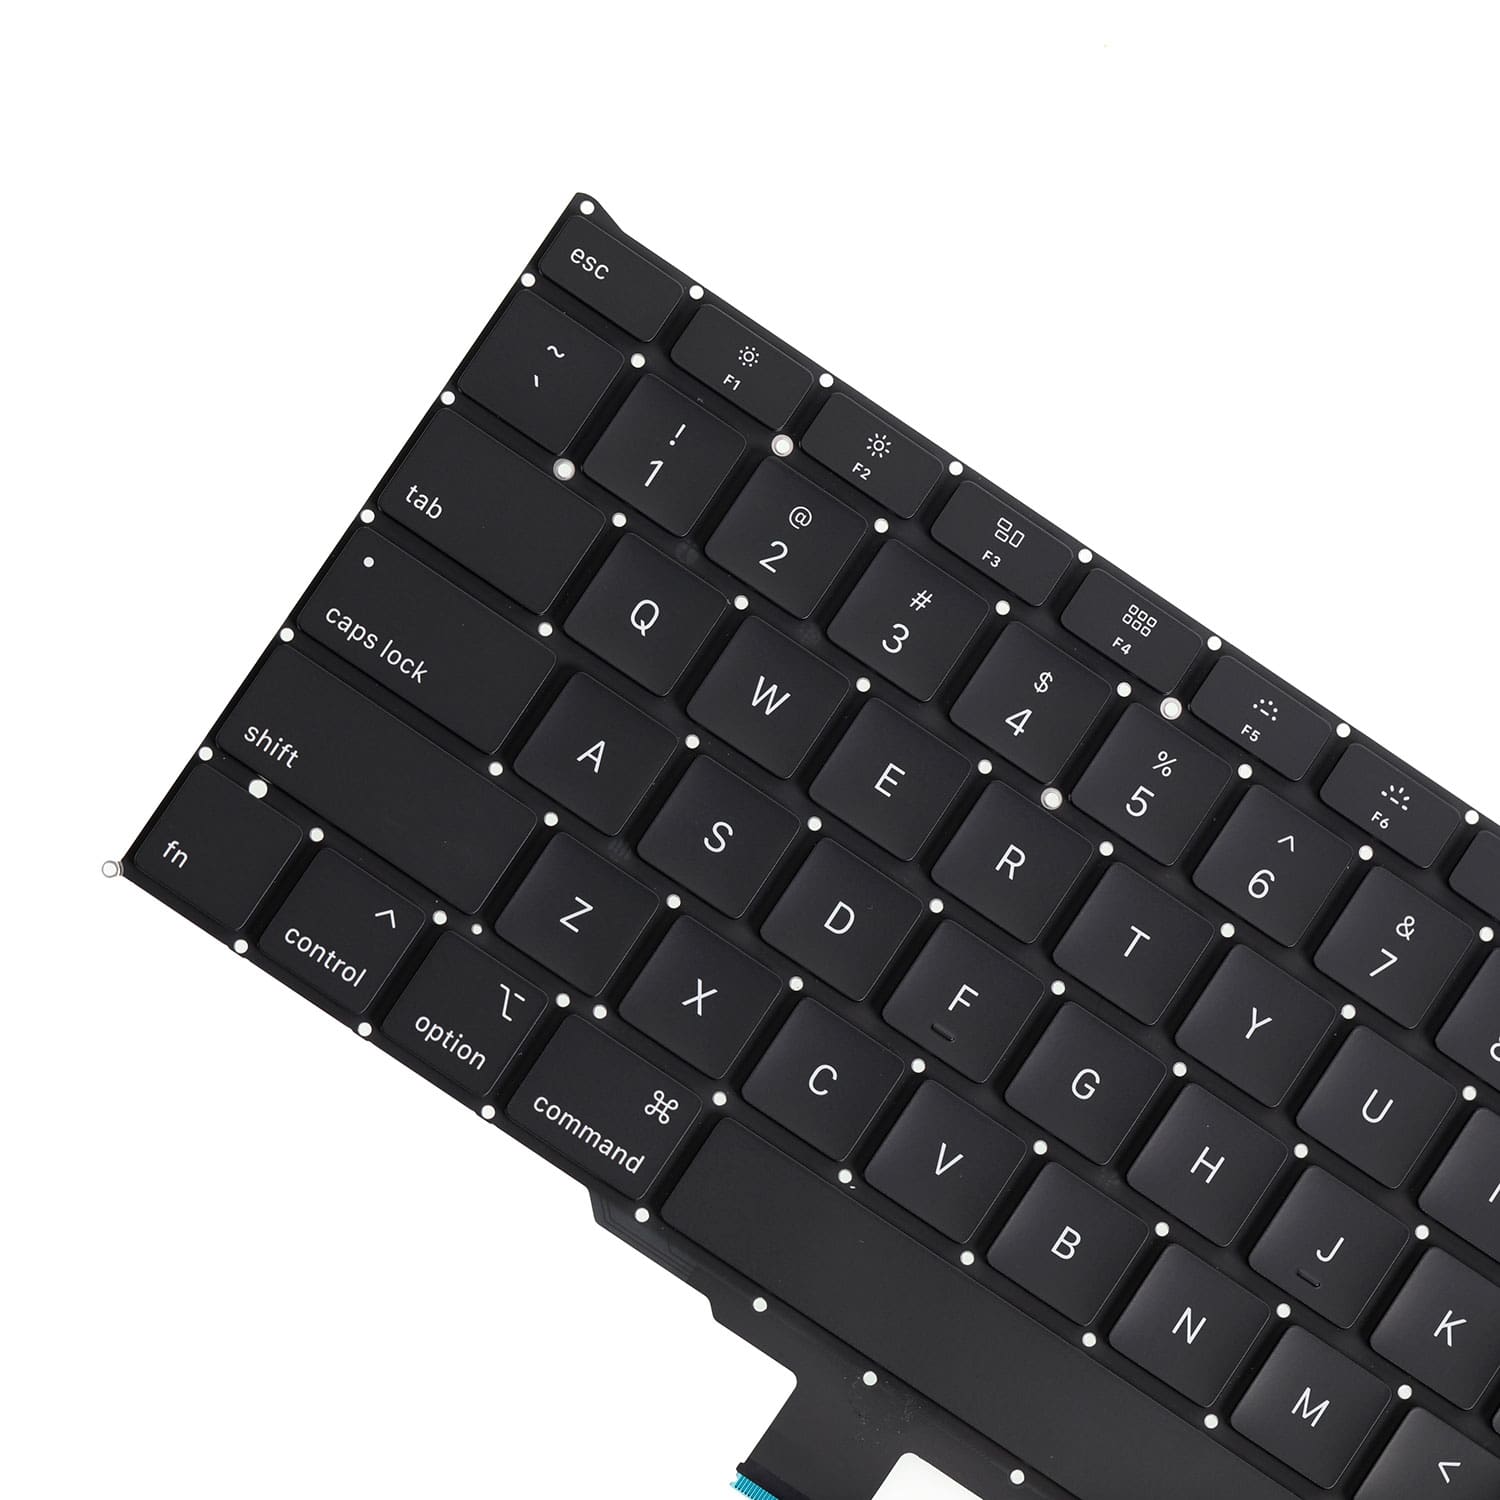 KEYBOARD (US ENGLISH) FOR MACBOOK AIR 13" A2179 (EARLY 2020)